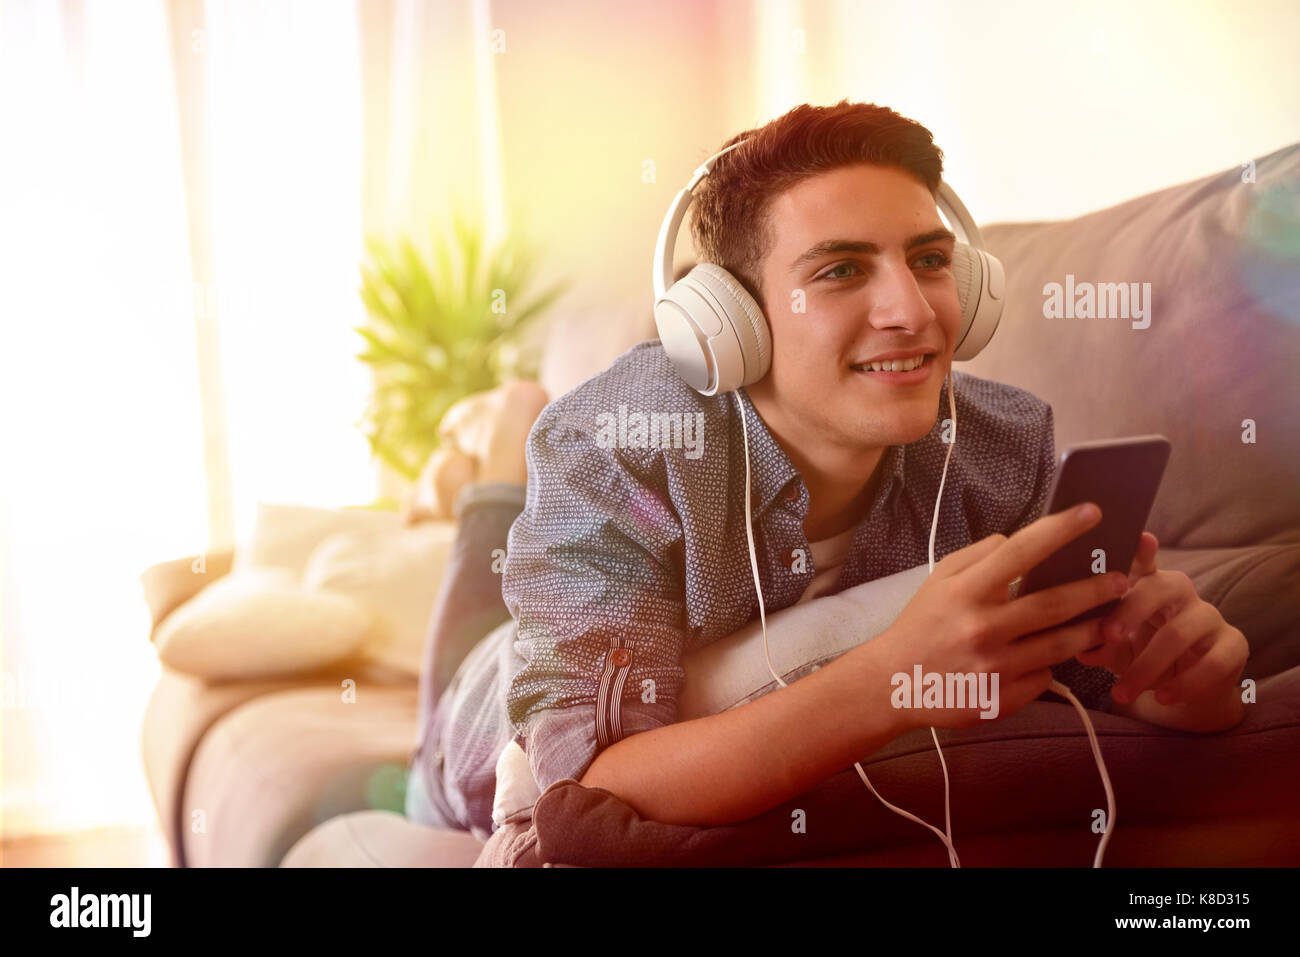 Teen listening music with headphones from mobile lying face down on couch multicolored lights Stock Photo